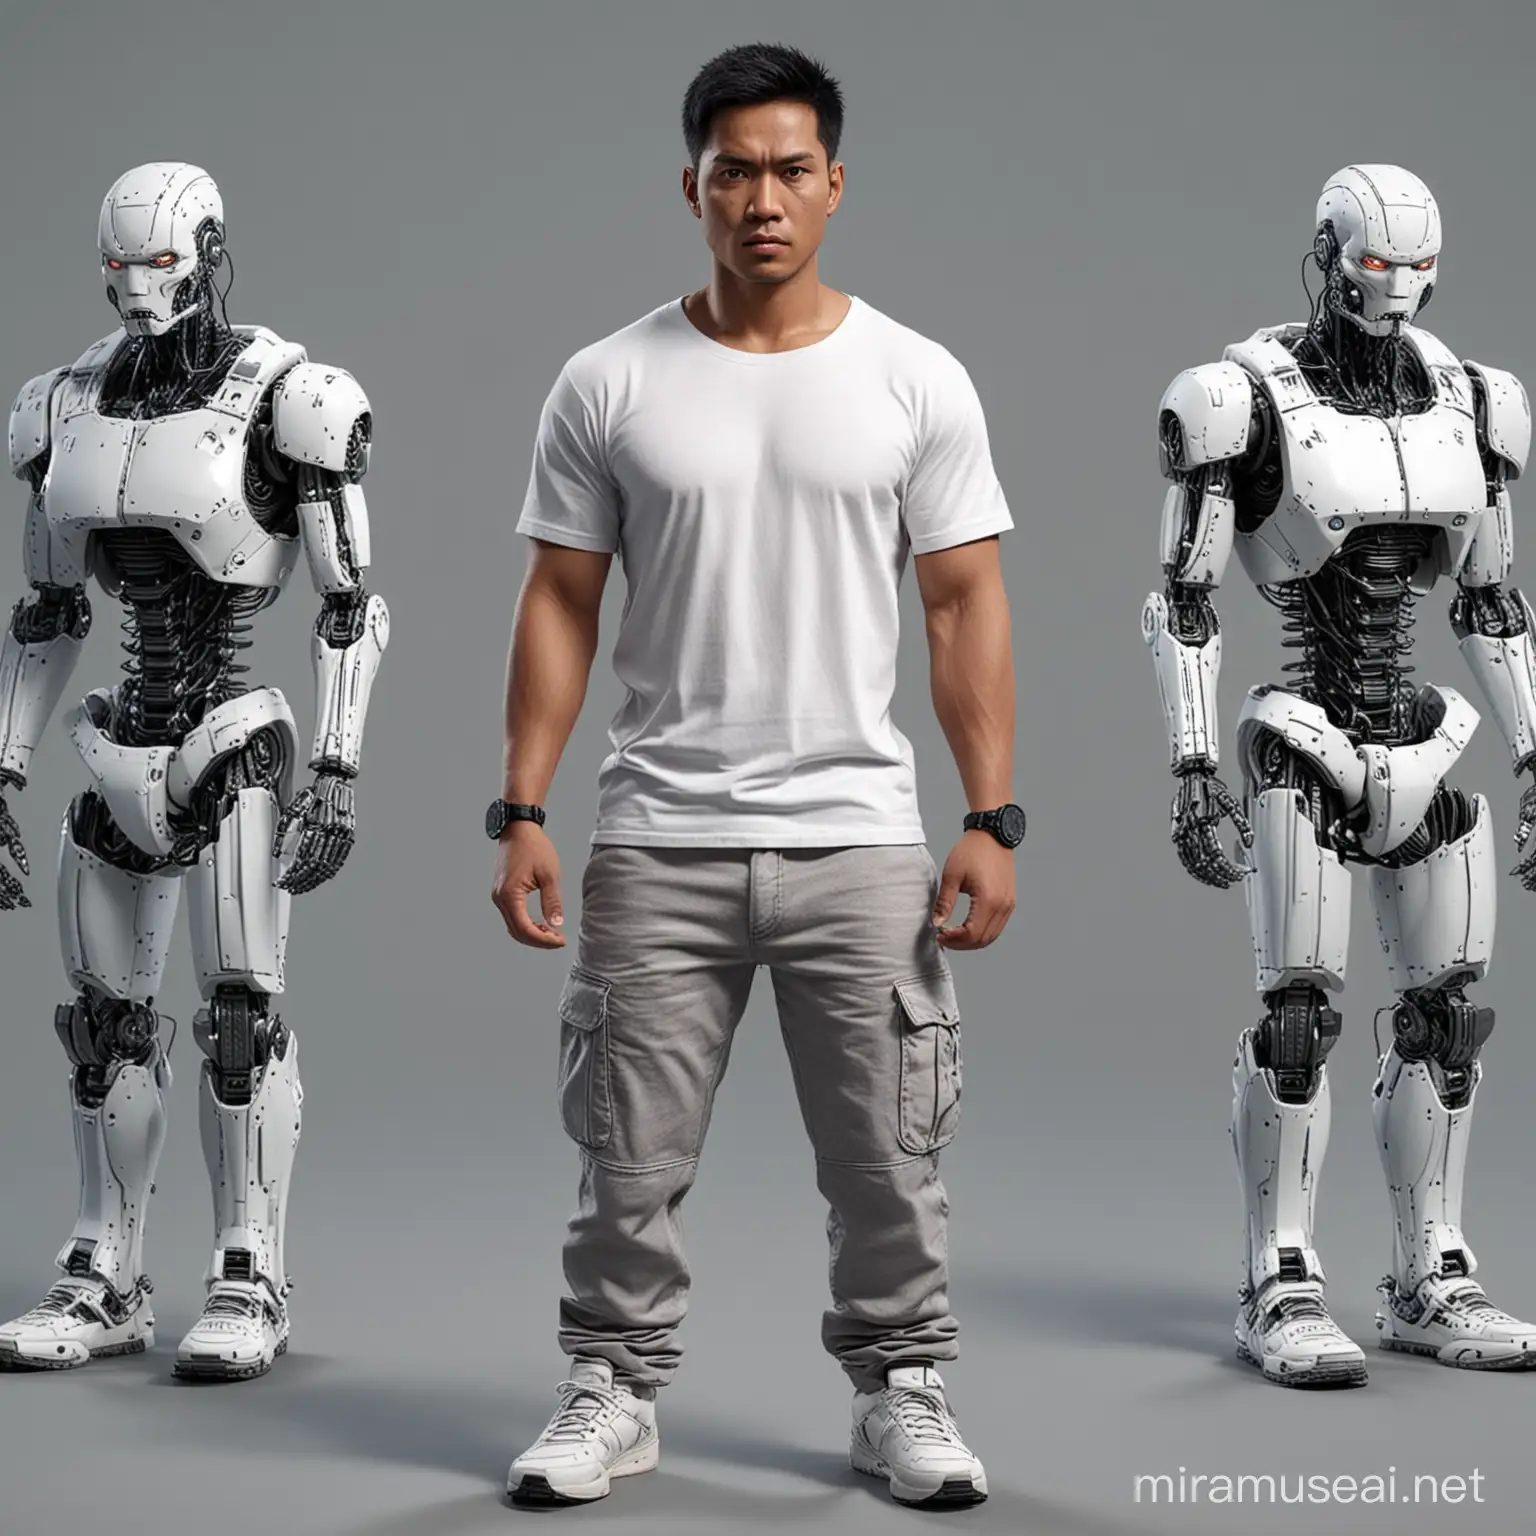 image of a 30 year old Indonesian man with a serious face, wearing white t-shirts, short striped cargo pants, sneakers, half of his face and head are robots, looks like a terminator, 3D, 4K, realistic